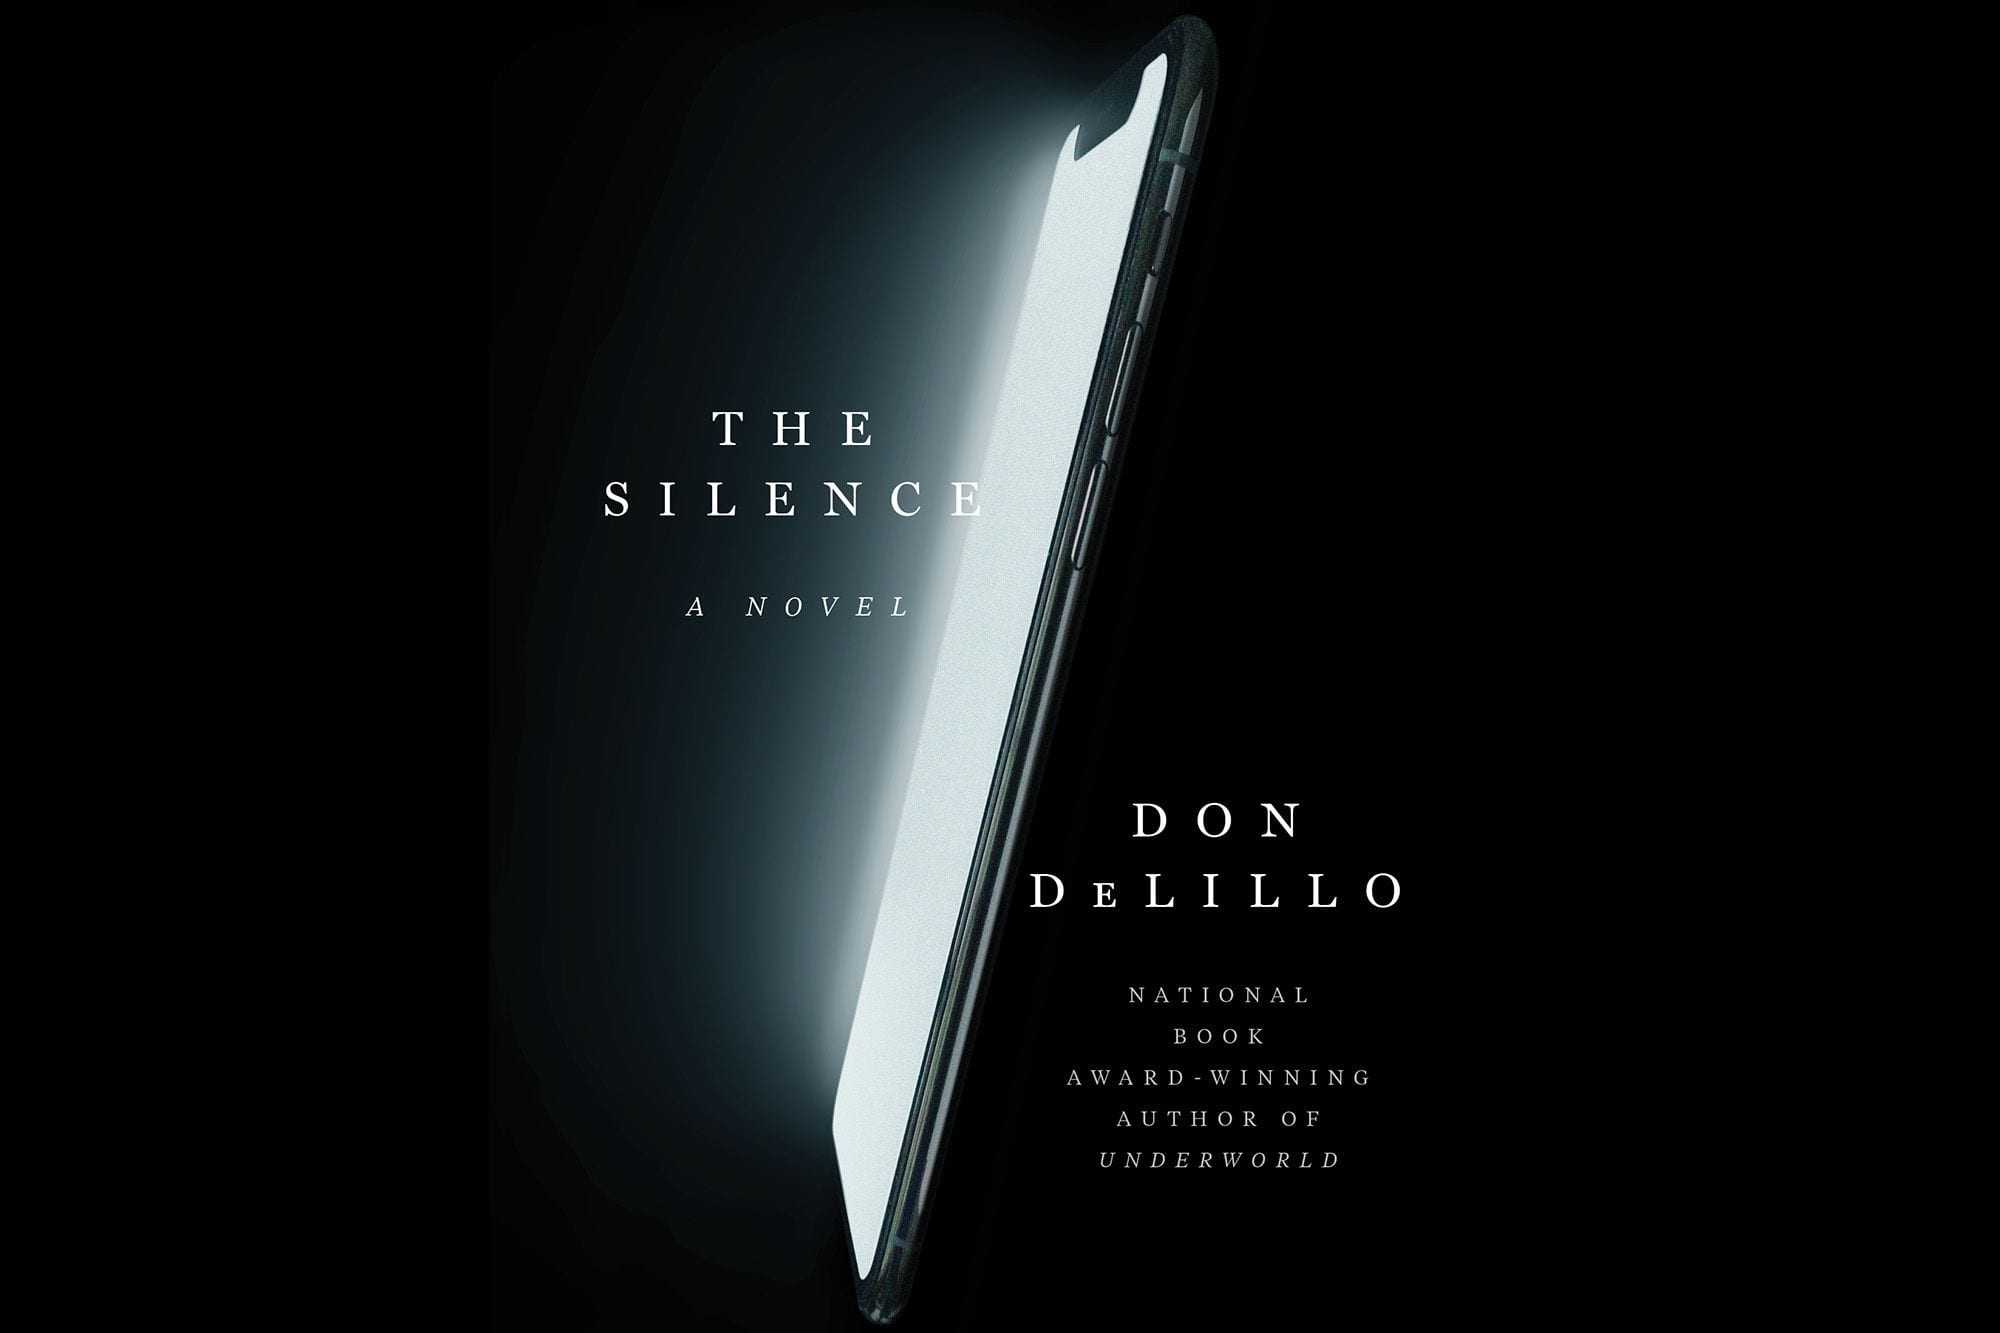 For Don DeLillo, ‘The Silence’ Is Deafening